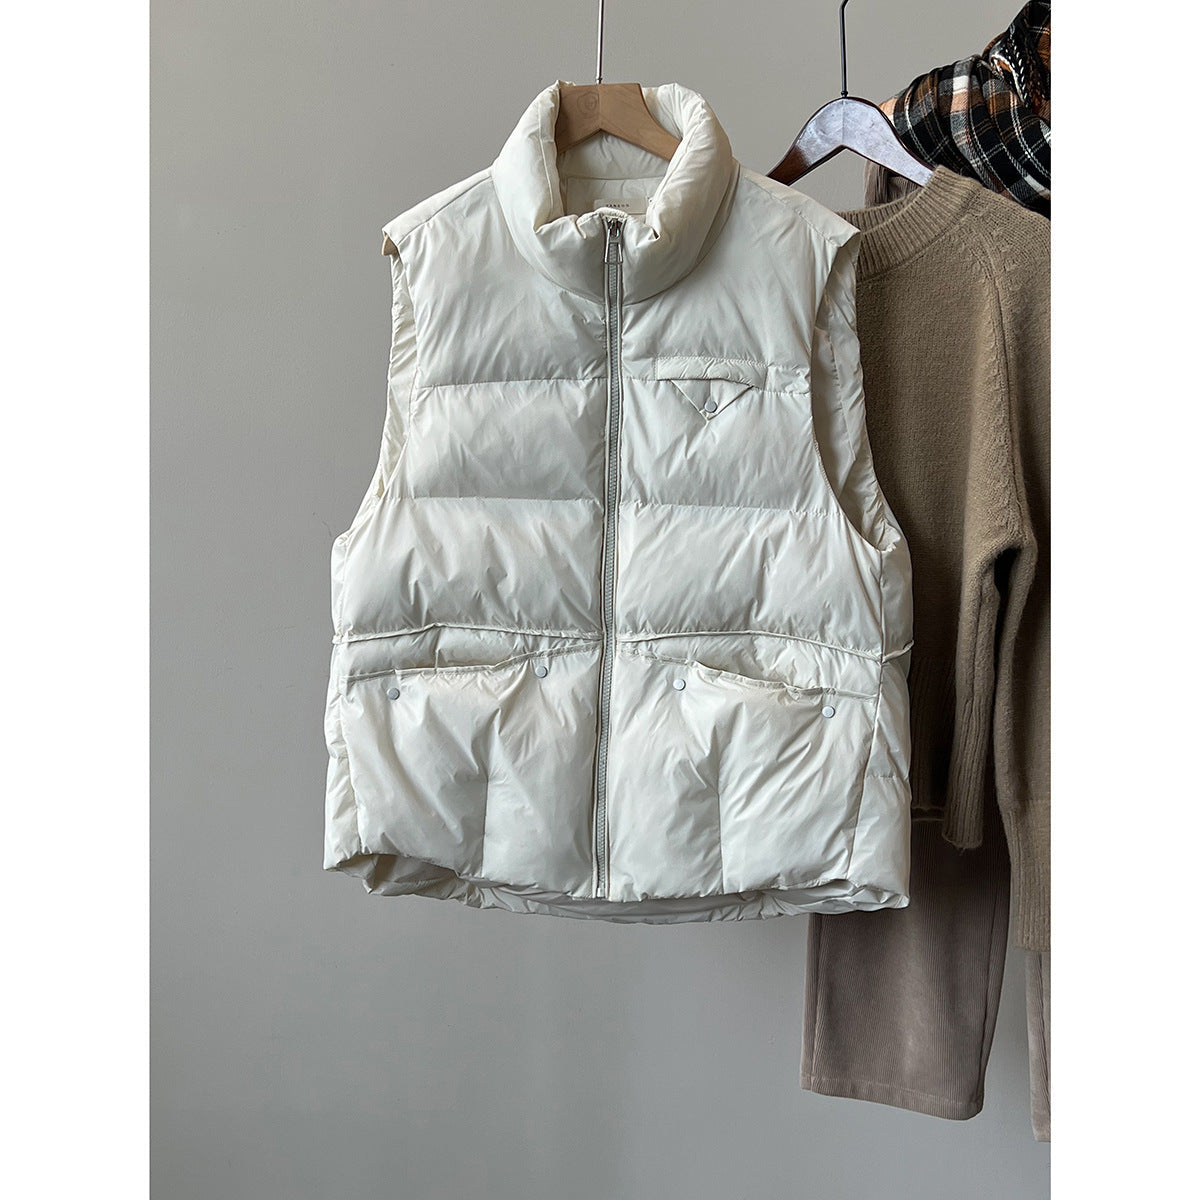 Winter Warm Sleeveless Vest for Women-Coats & Jackets-White-M-Free Shipping at meselling99